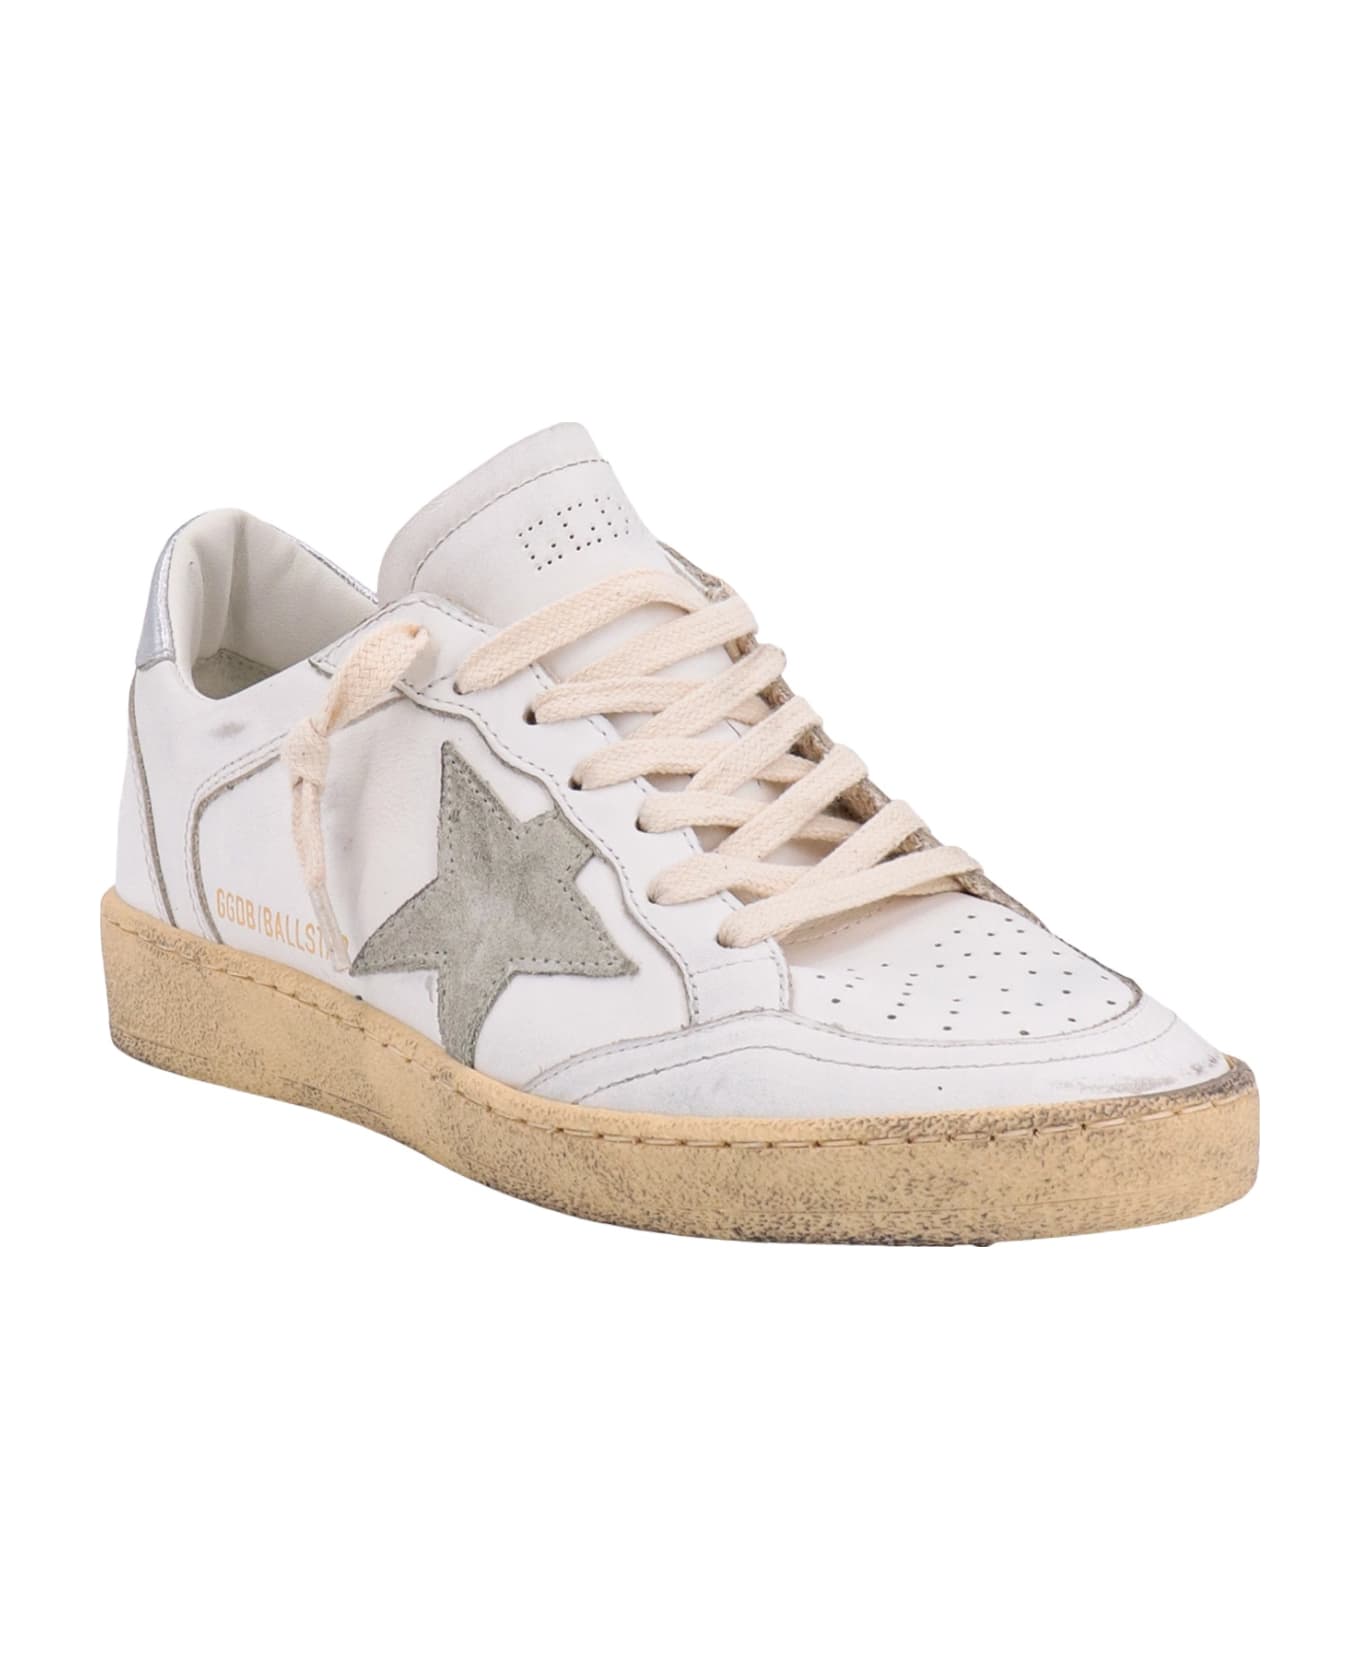 Golden Goose Ball Star Double Quarter Leather Sneakers - White/Ice/Silver